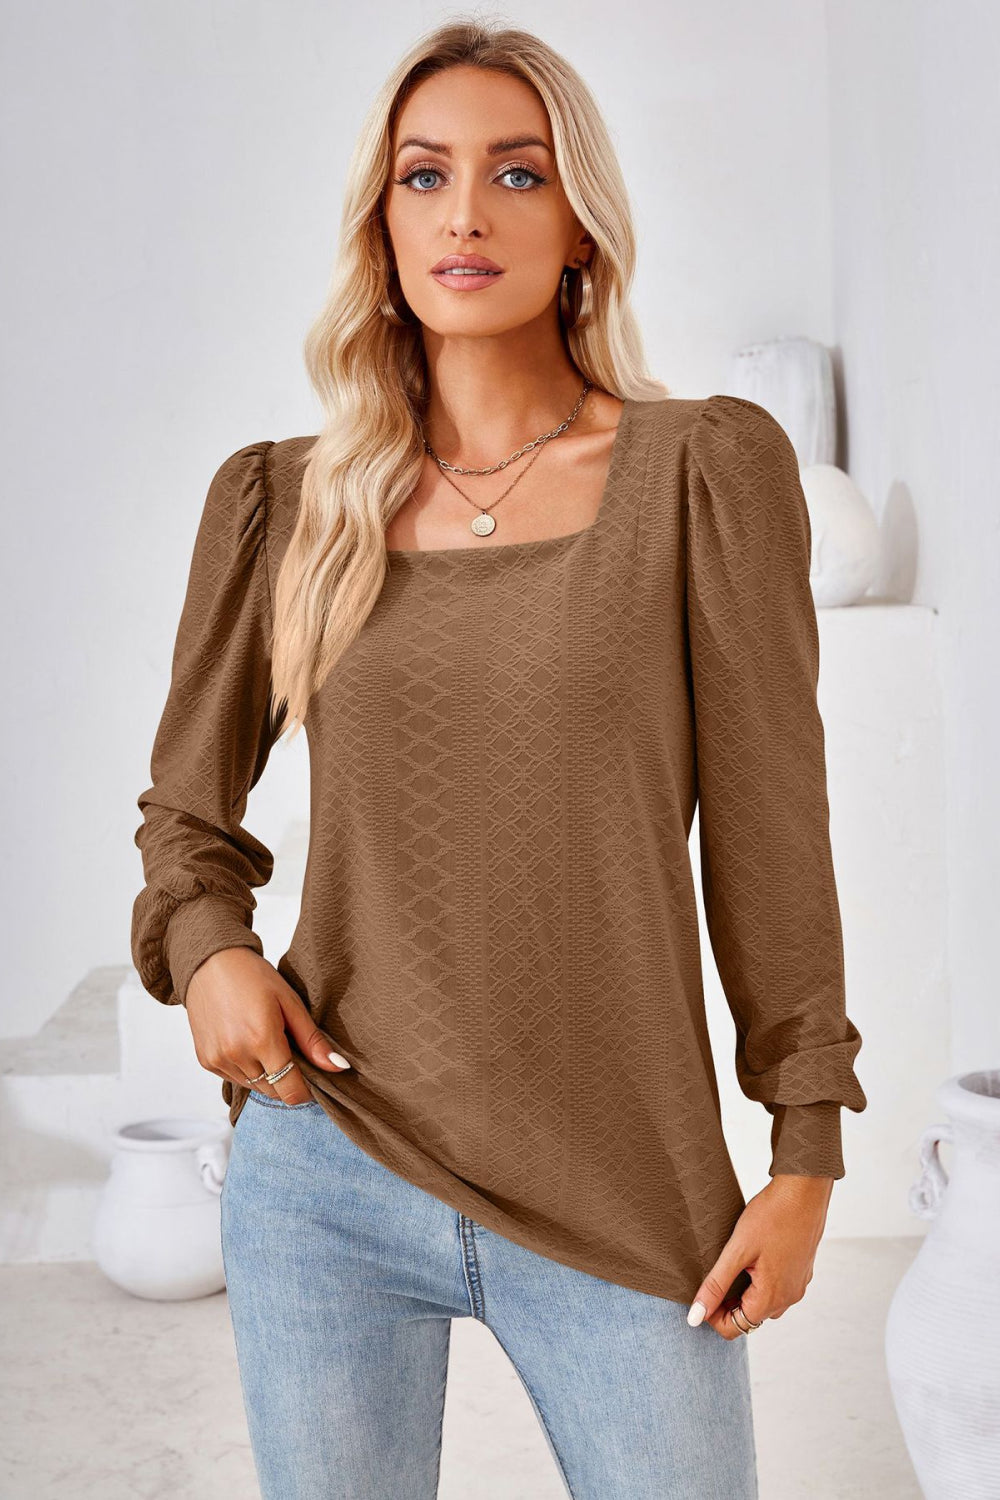 Square Neck Puff Sleeve Blouse - Women’s Clothing & Accessories - Shirts & Tops - 19 - 2024